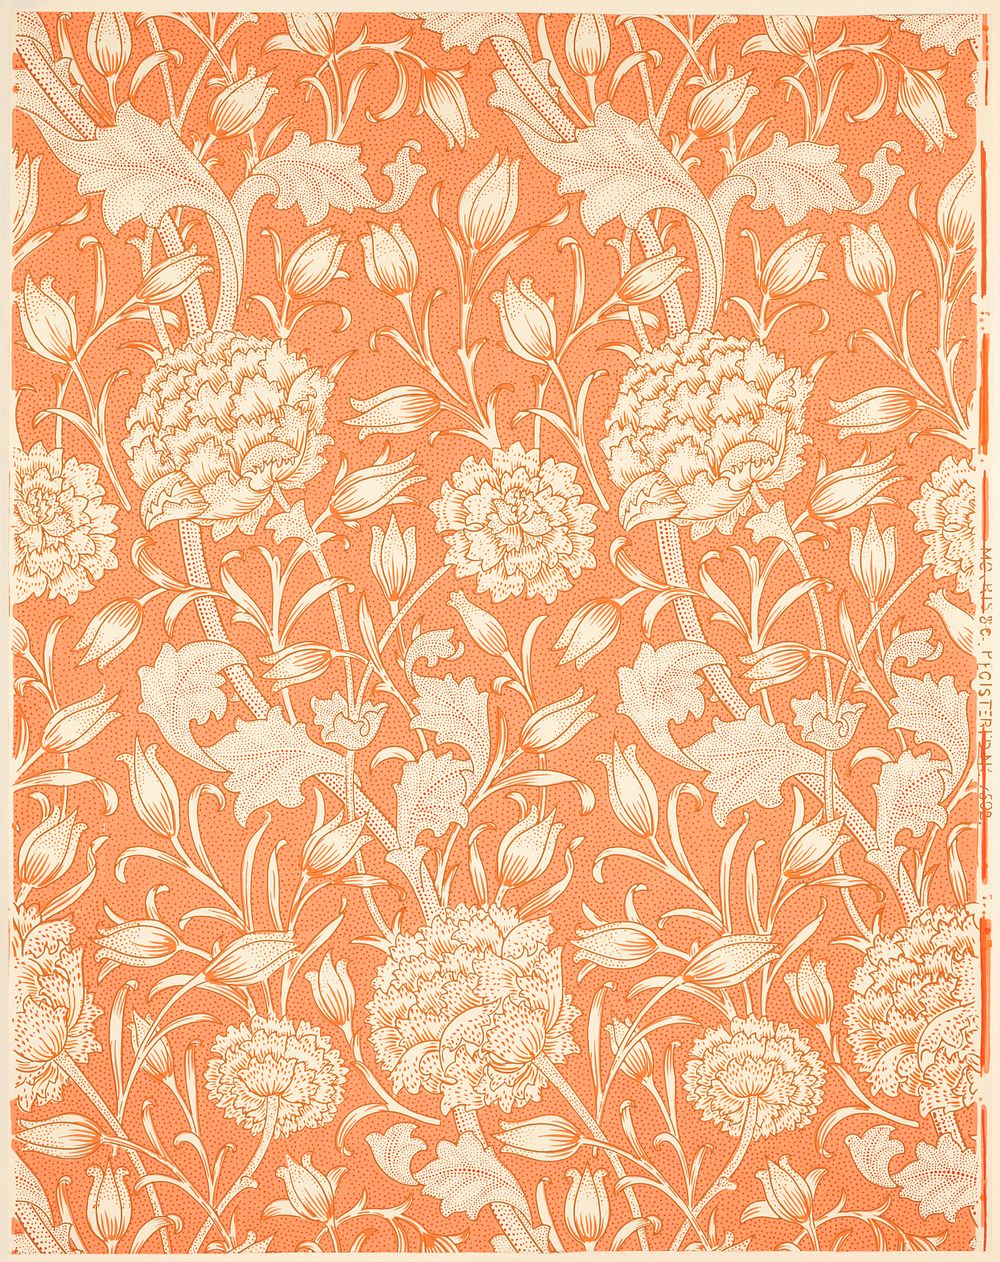 William Morris's (1834-1896) Wild Tulip famous pattern. Original from The MET Museum. Digitally enhanced by rawpixel.